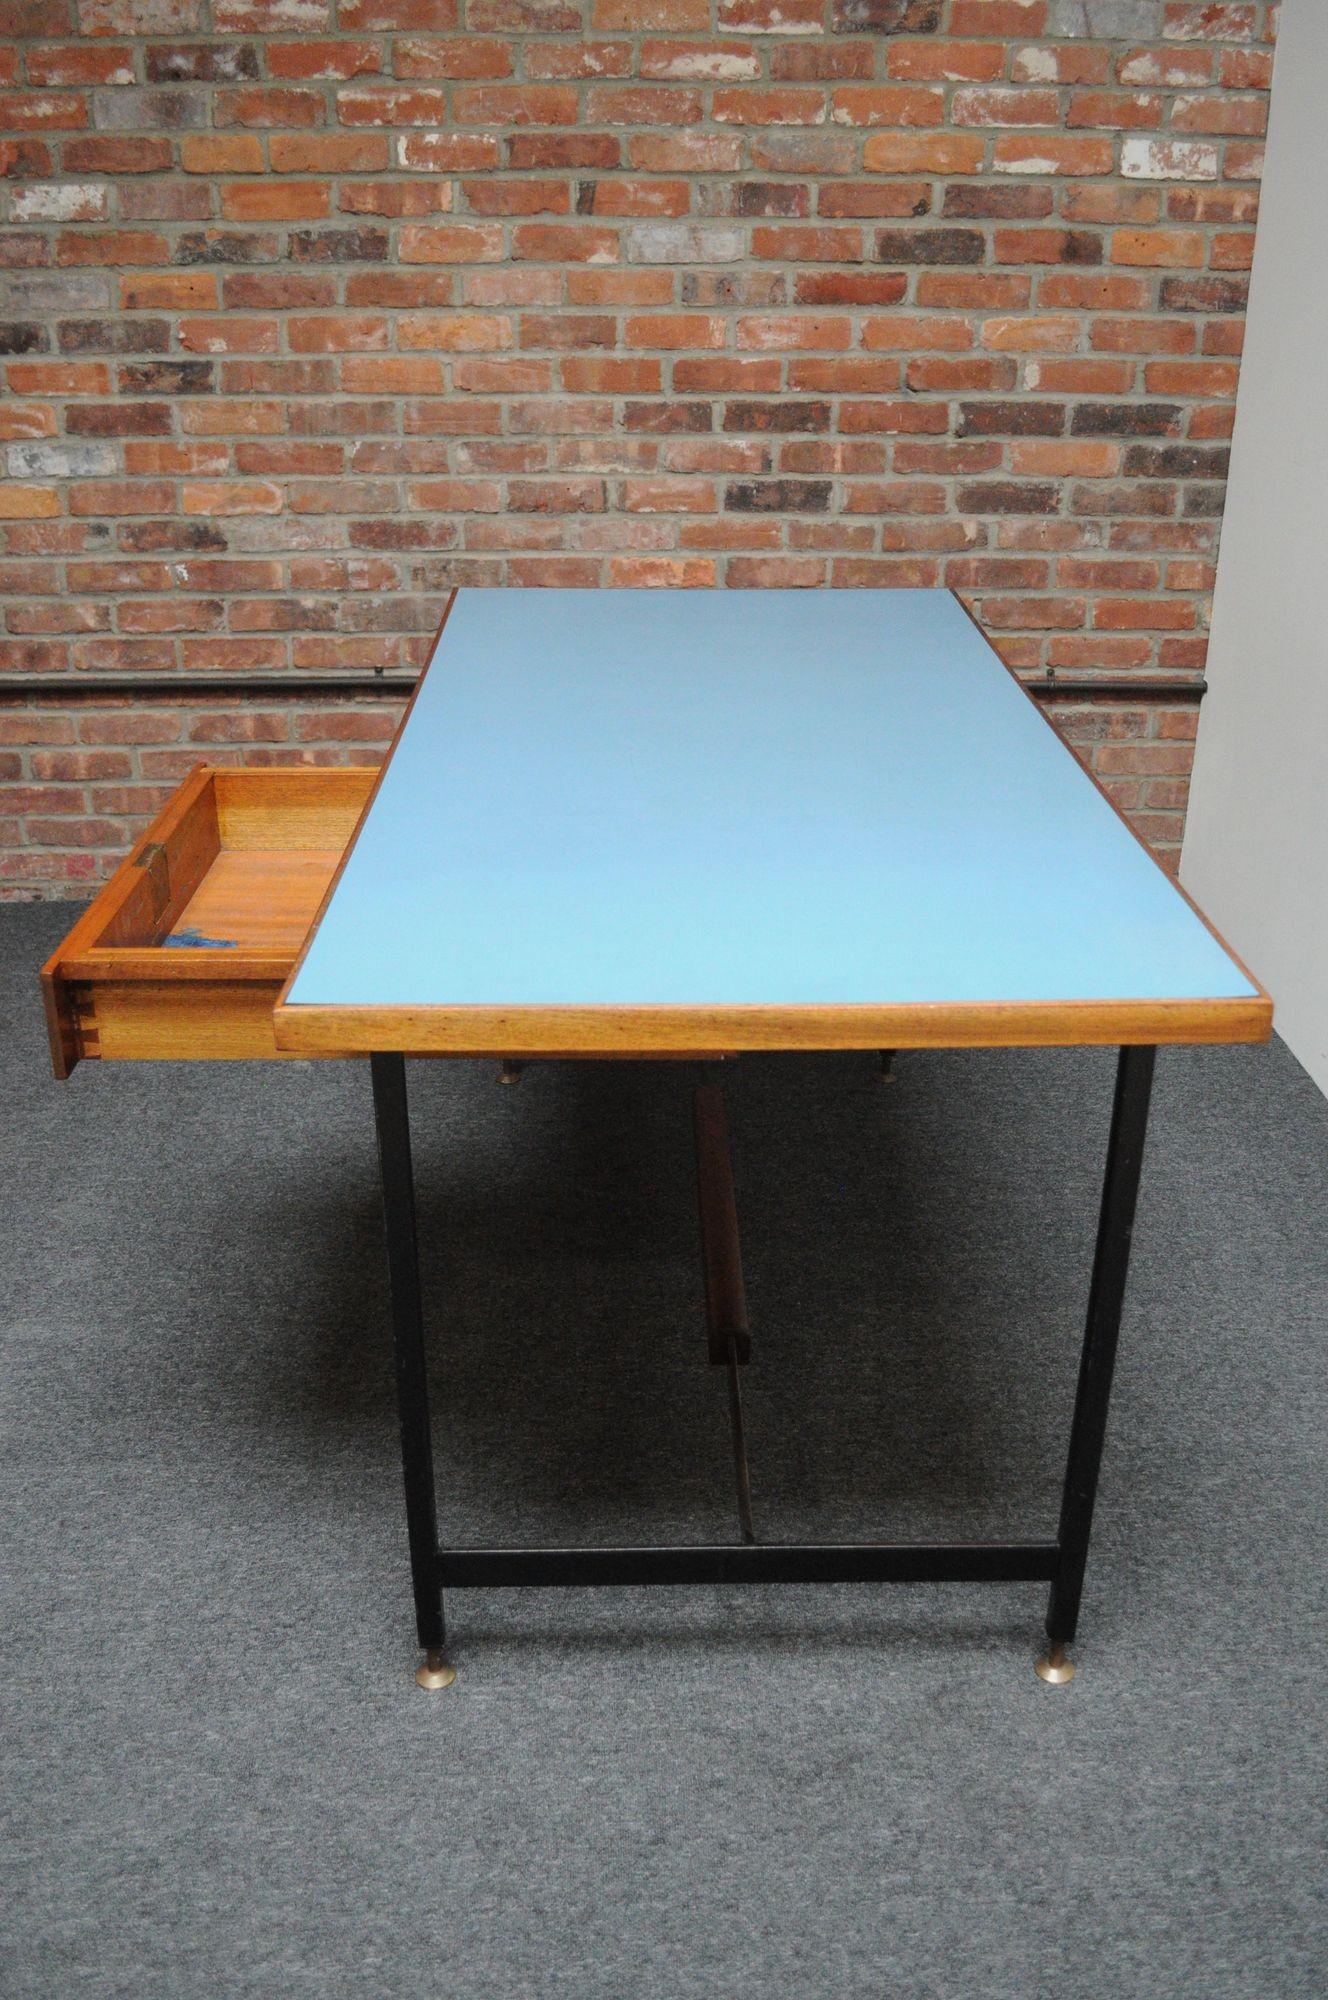 Lacquered Mid-Century Italian Modern Walnut and Steel Desk with Blue Laminate Top For Sale